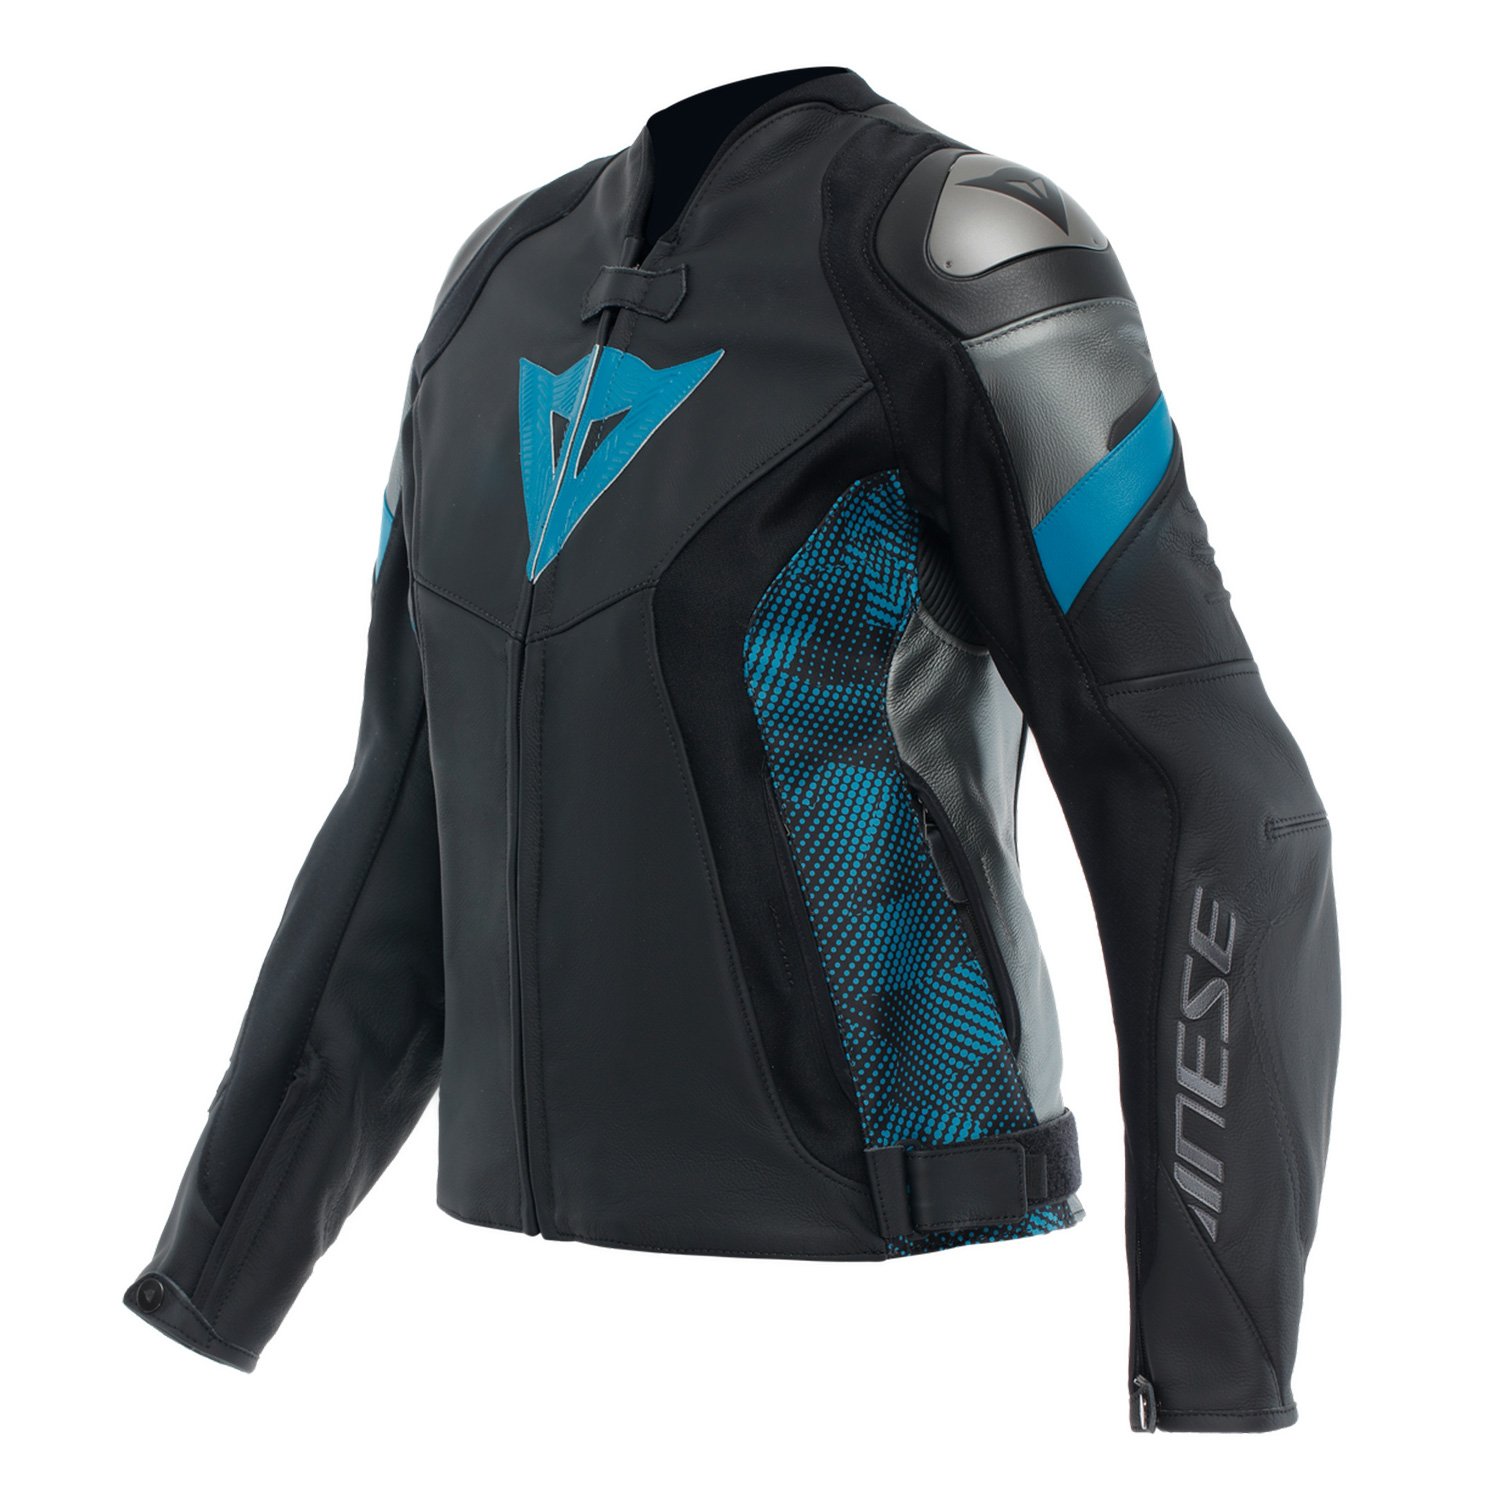 Image of Dainese Avro 5 Leather Jacket WMN Black Teal Anthracite Size 50 ID 8051019639882